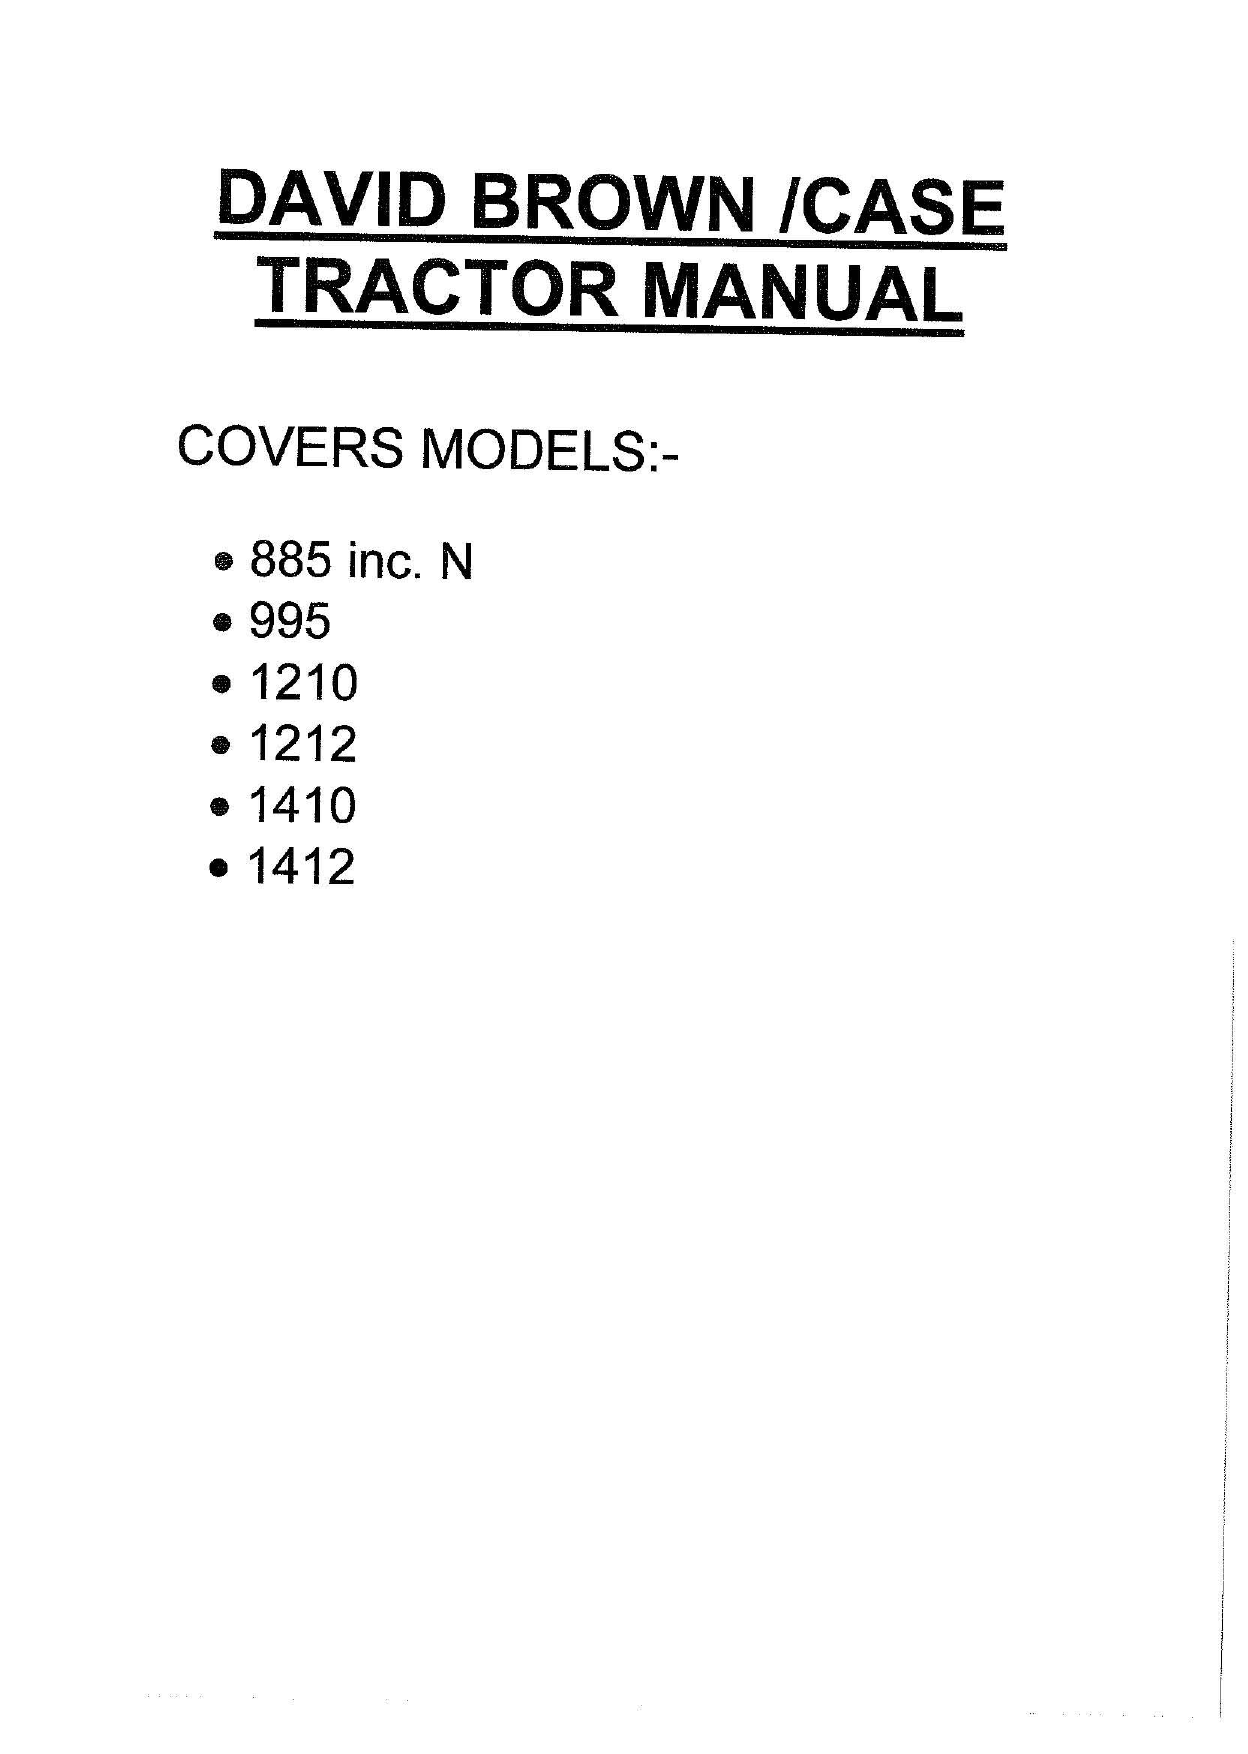 1974-1979 David Brown/Case 1412 tractor manual Preview image 1